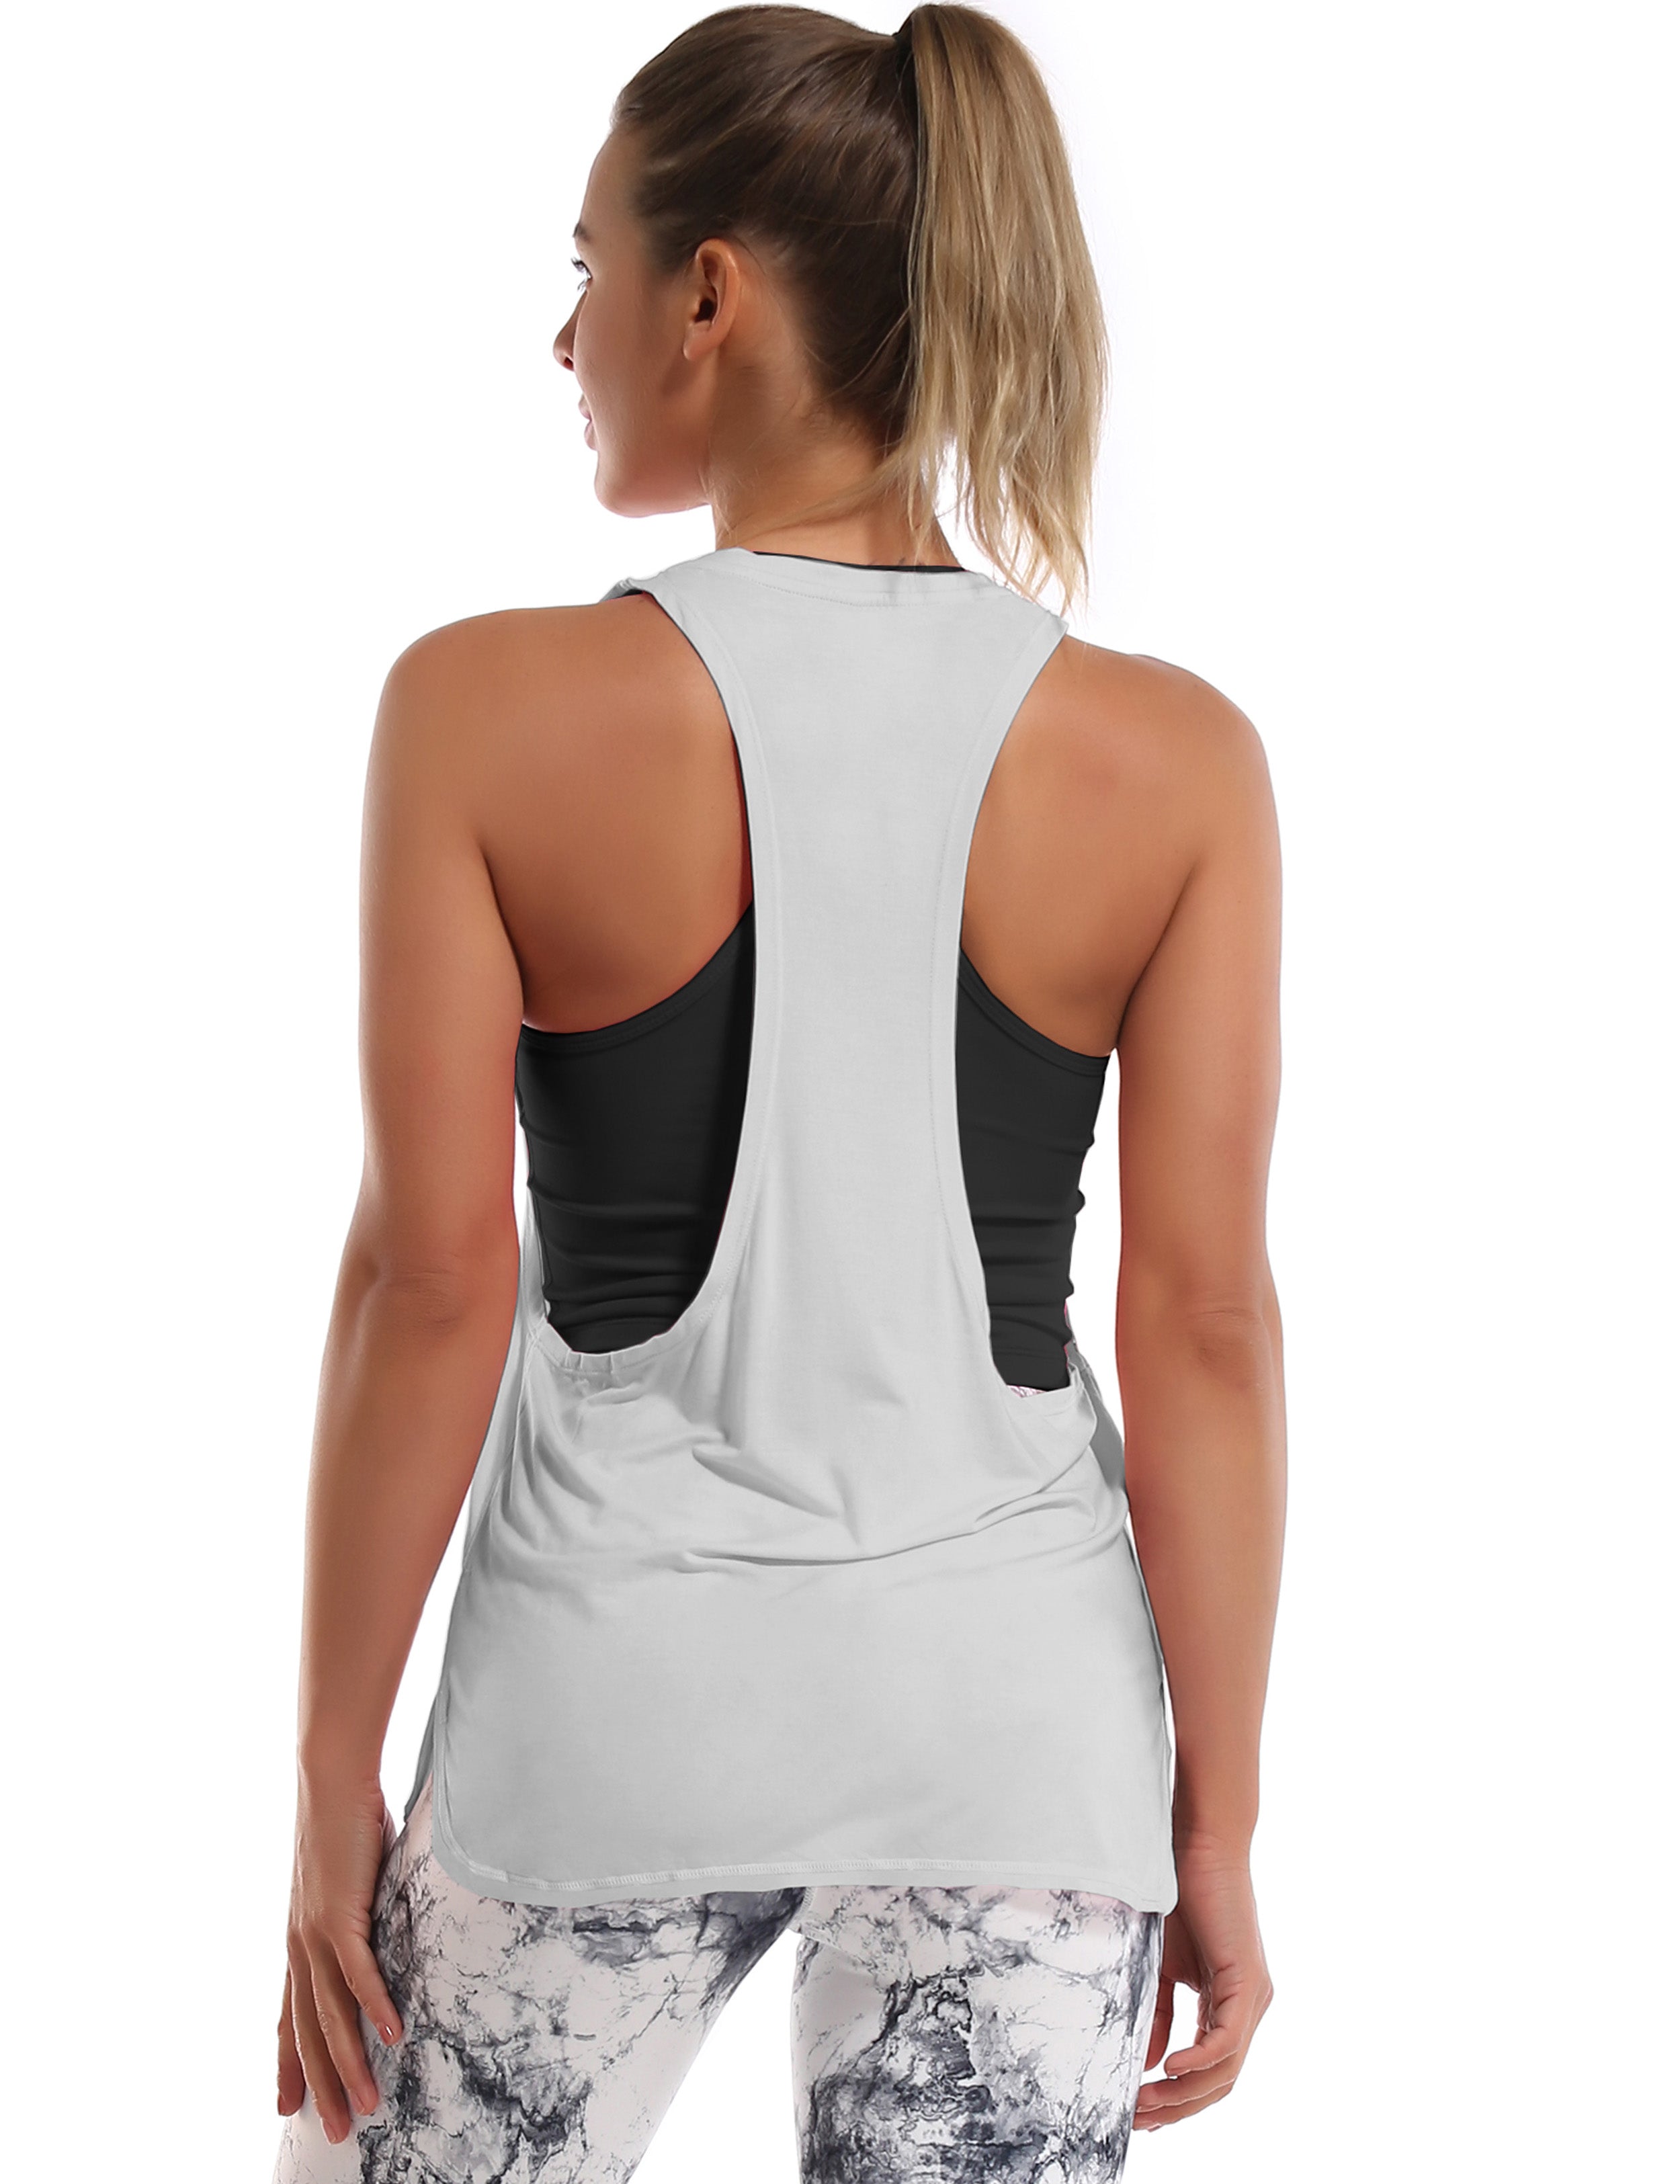 Low Cut Loose Fit Tank Top lightgray Designed for On the Move Loose fit 93%Modal/7%Spandex Four-way stretch Naturally breathable Super-Soft, Modal Fabric